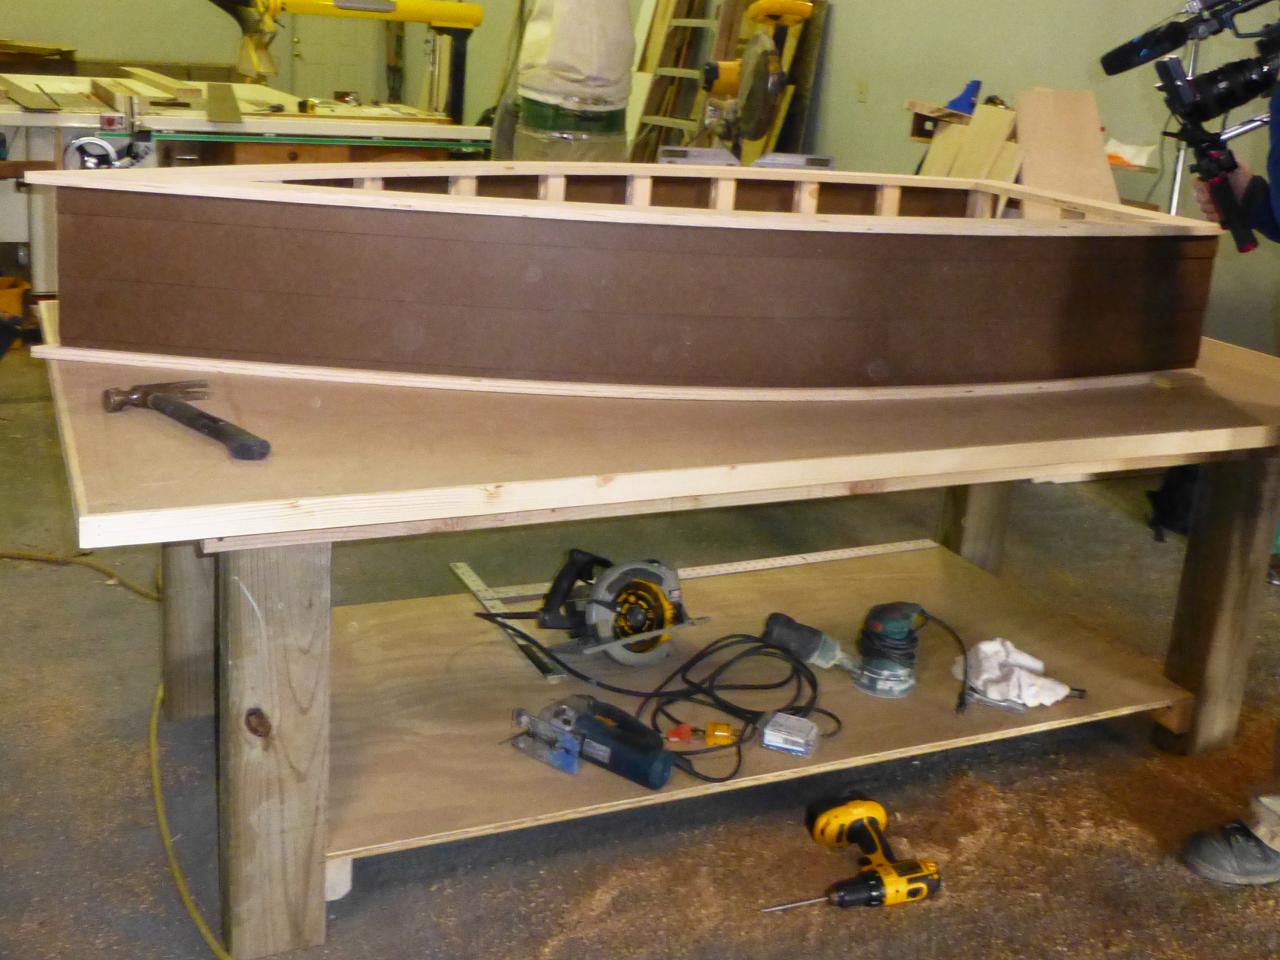 How To Build A Lake Inspired Boat Shelf, How To Build Boat Shaped Bookcase